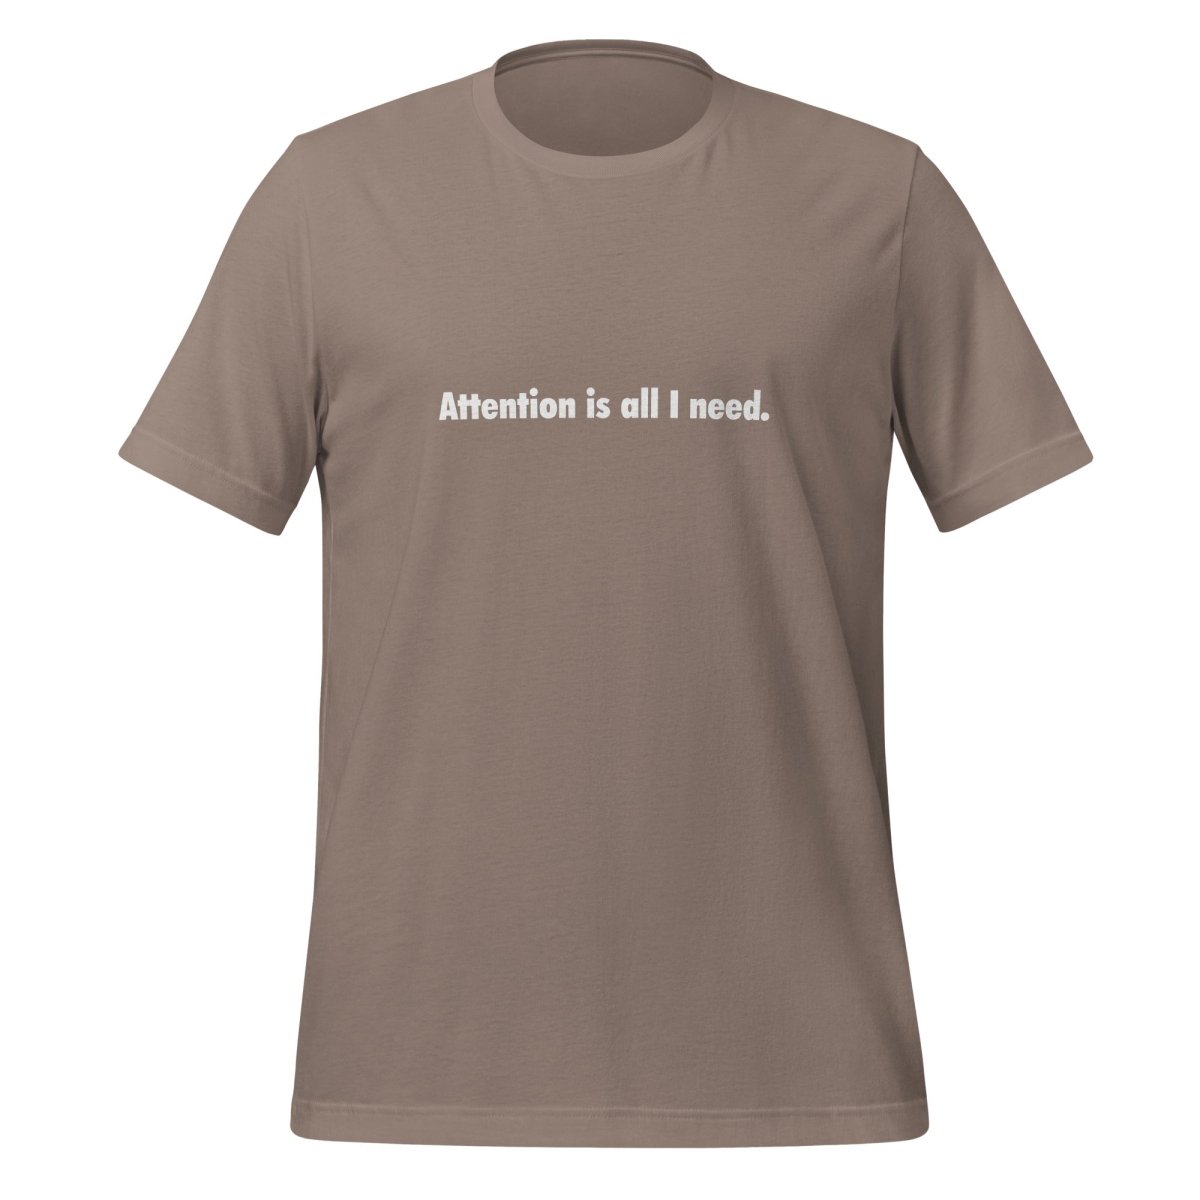 Attention is all I need. T - Shirt (unisex) - Pebble - AI Store